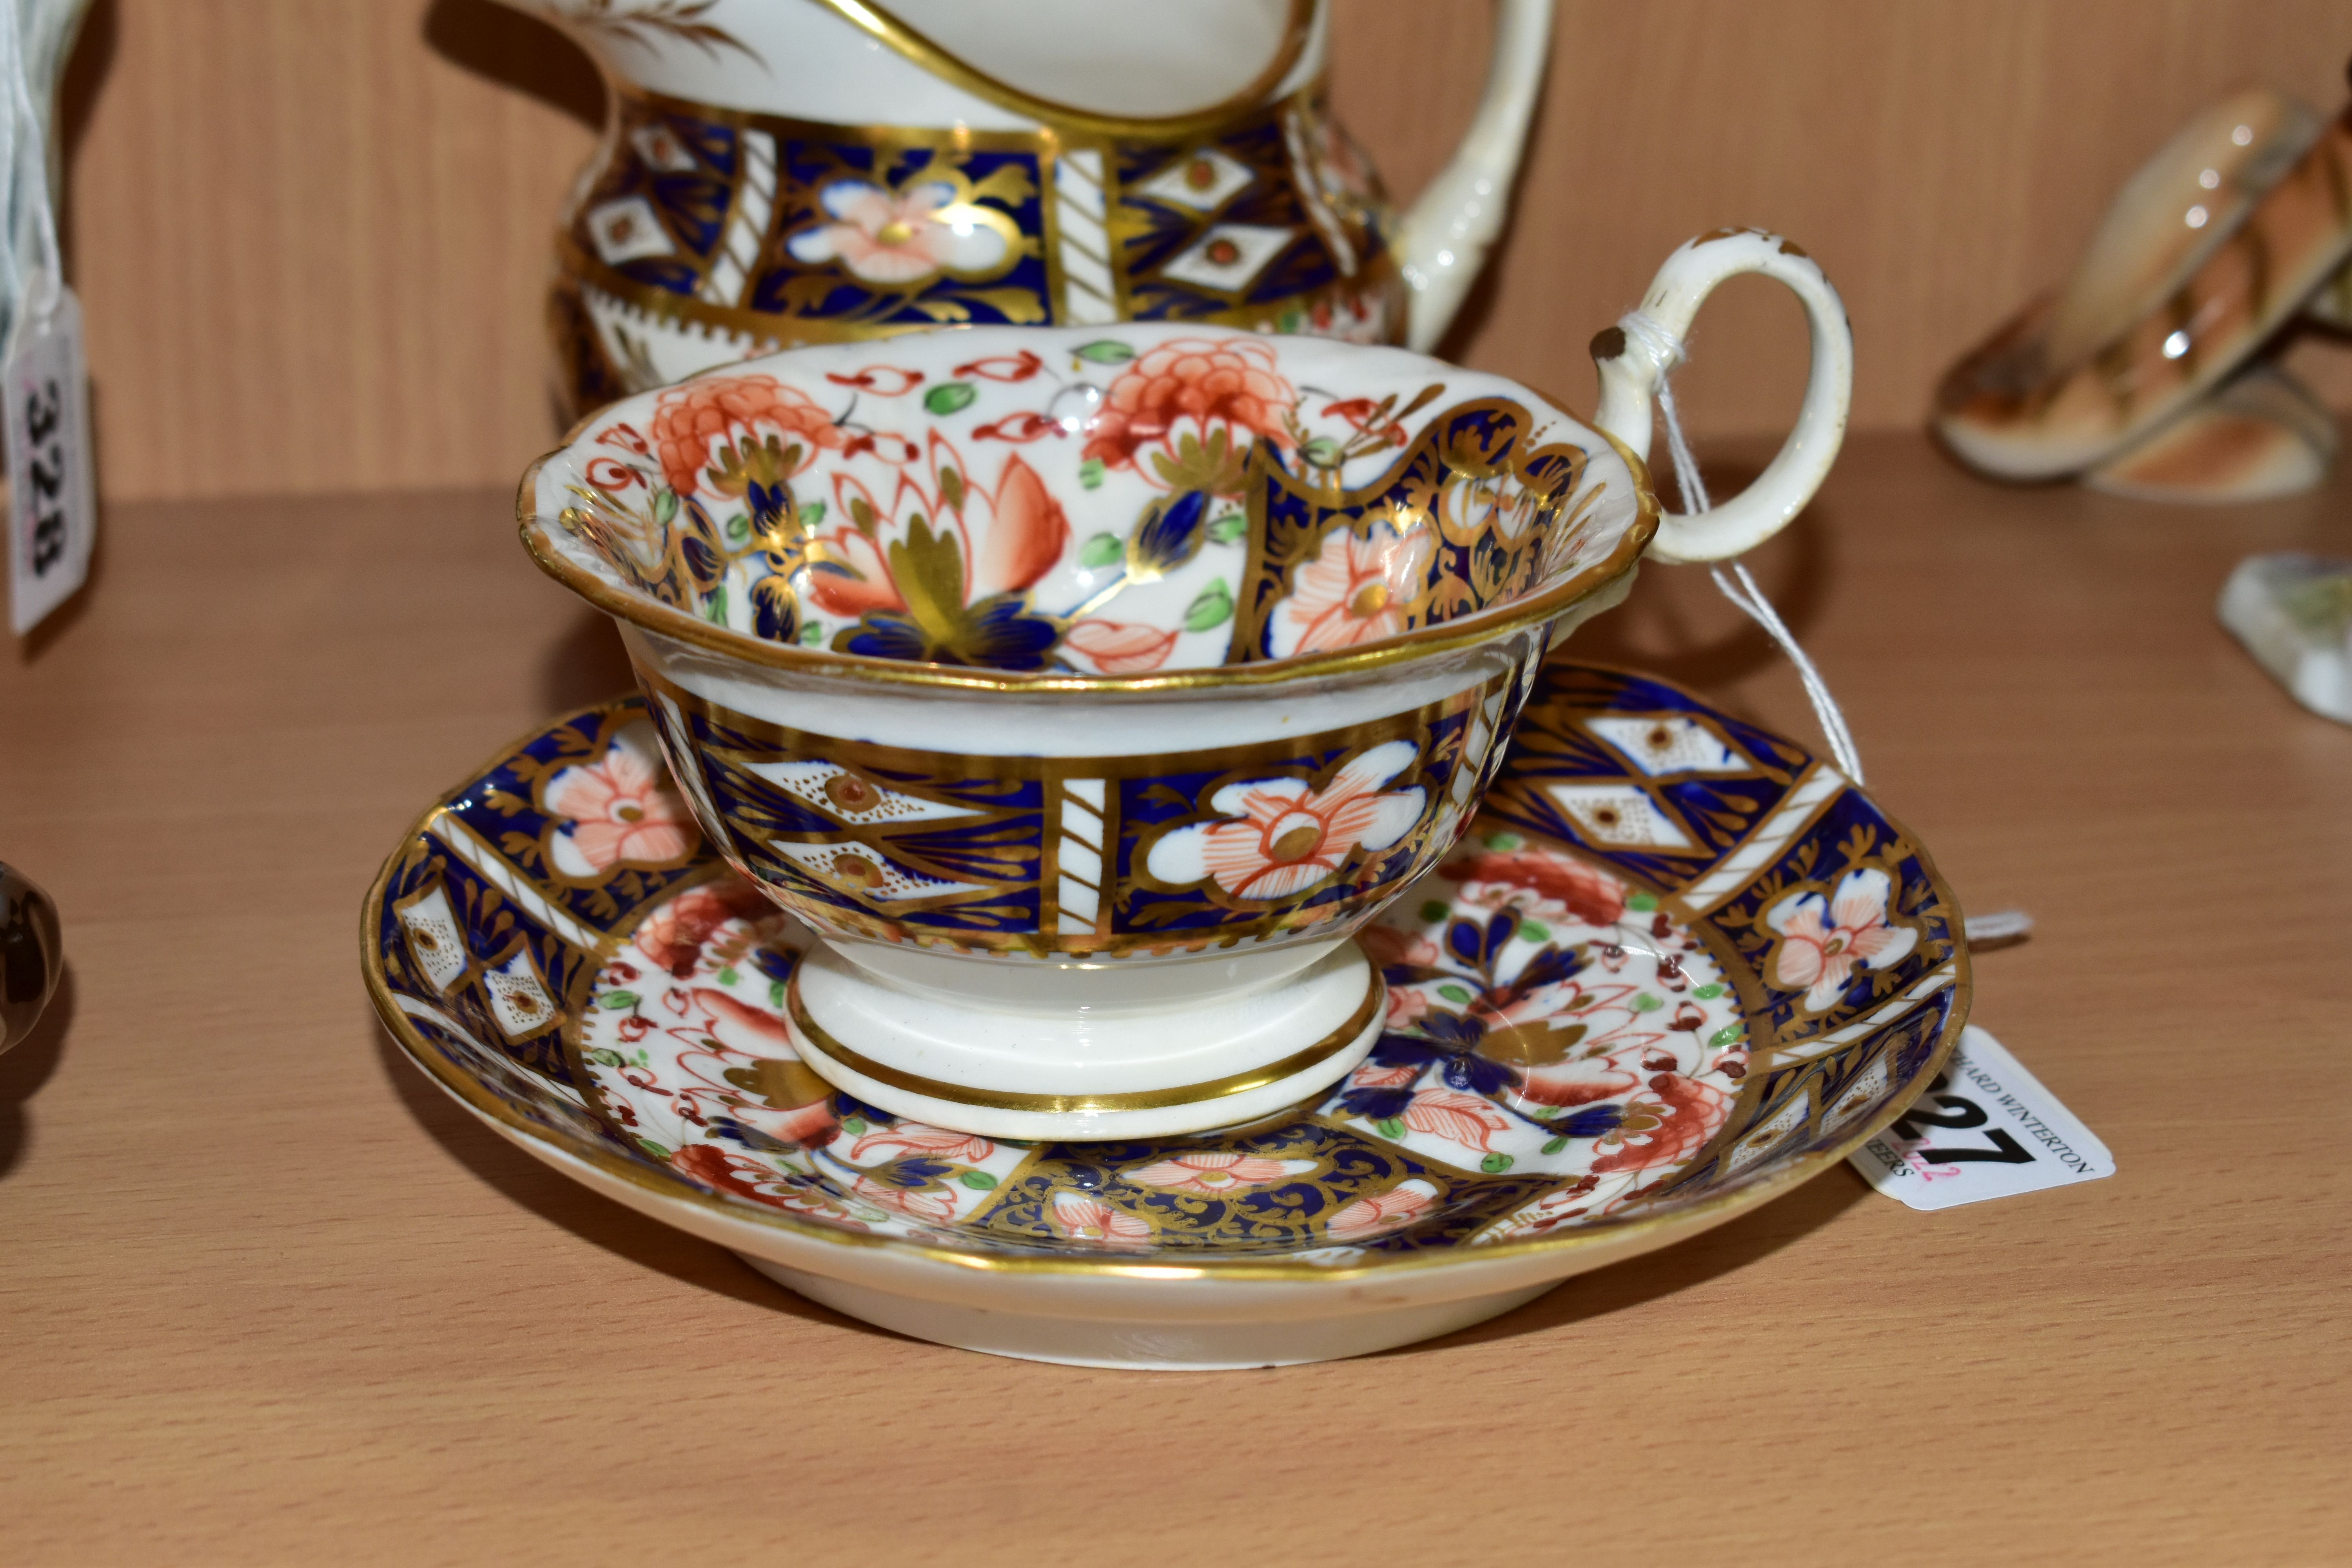 A NINETEENTH CENTURY ENGLISH TEACUP, SAUCER AND CREAM JUG, in an Imari pattern, the teacup having - Image 2 of 4